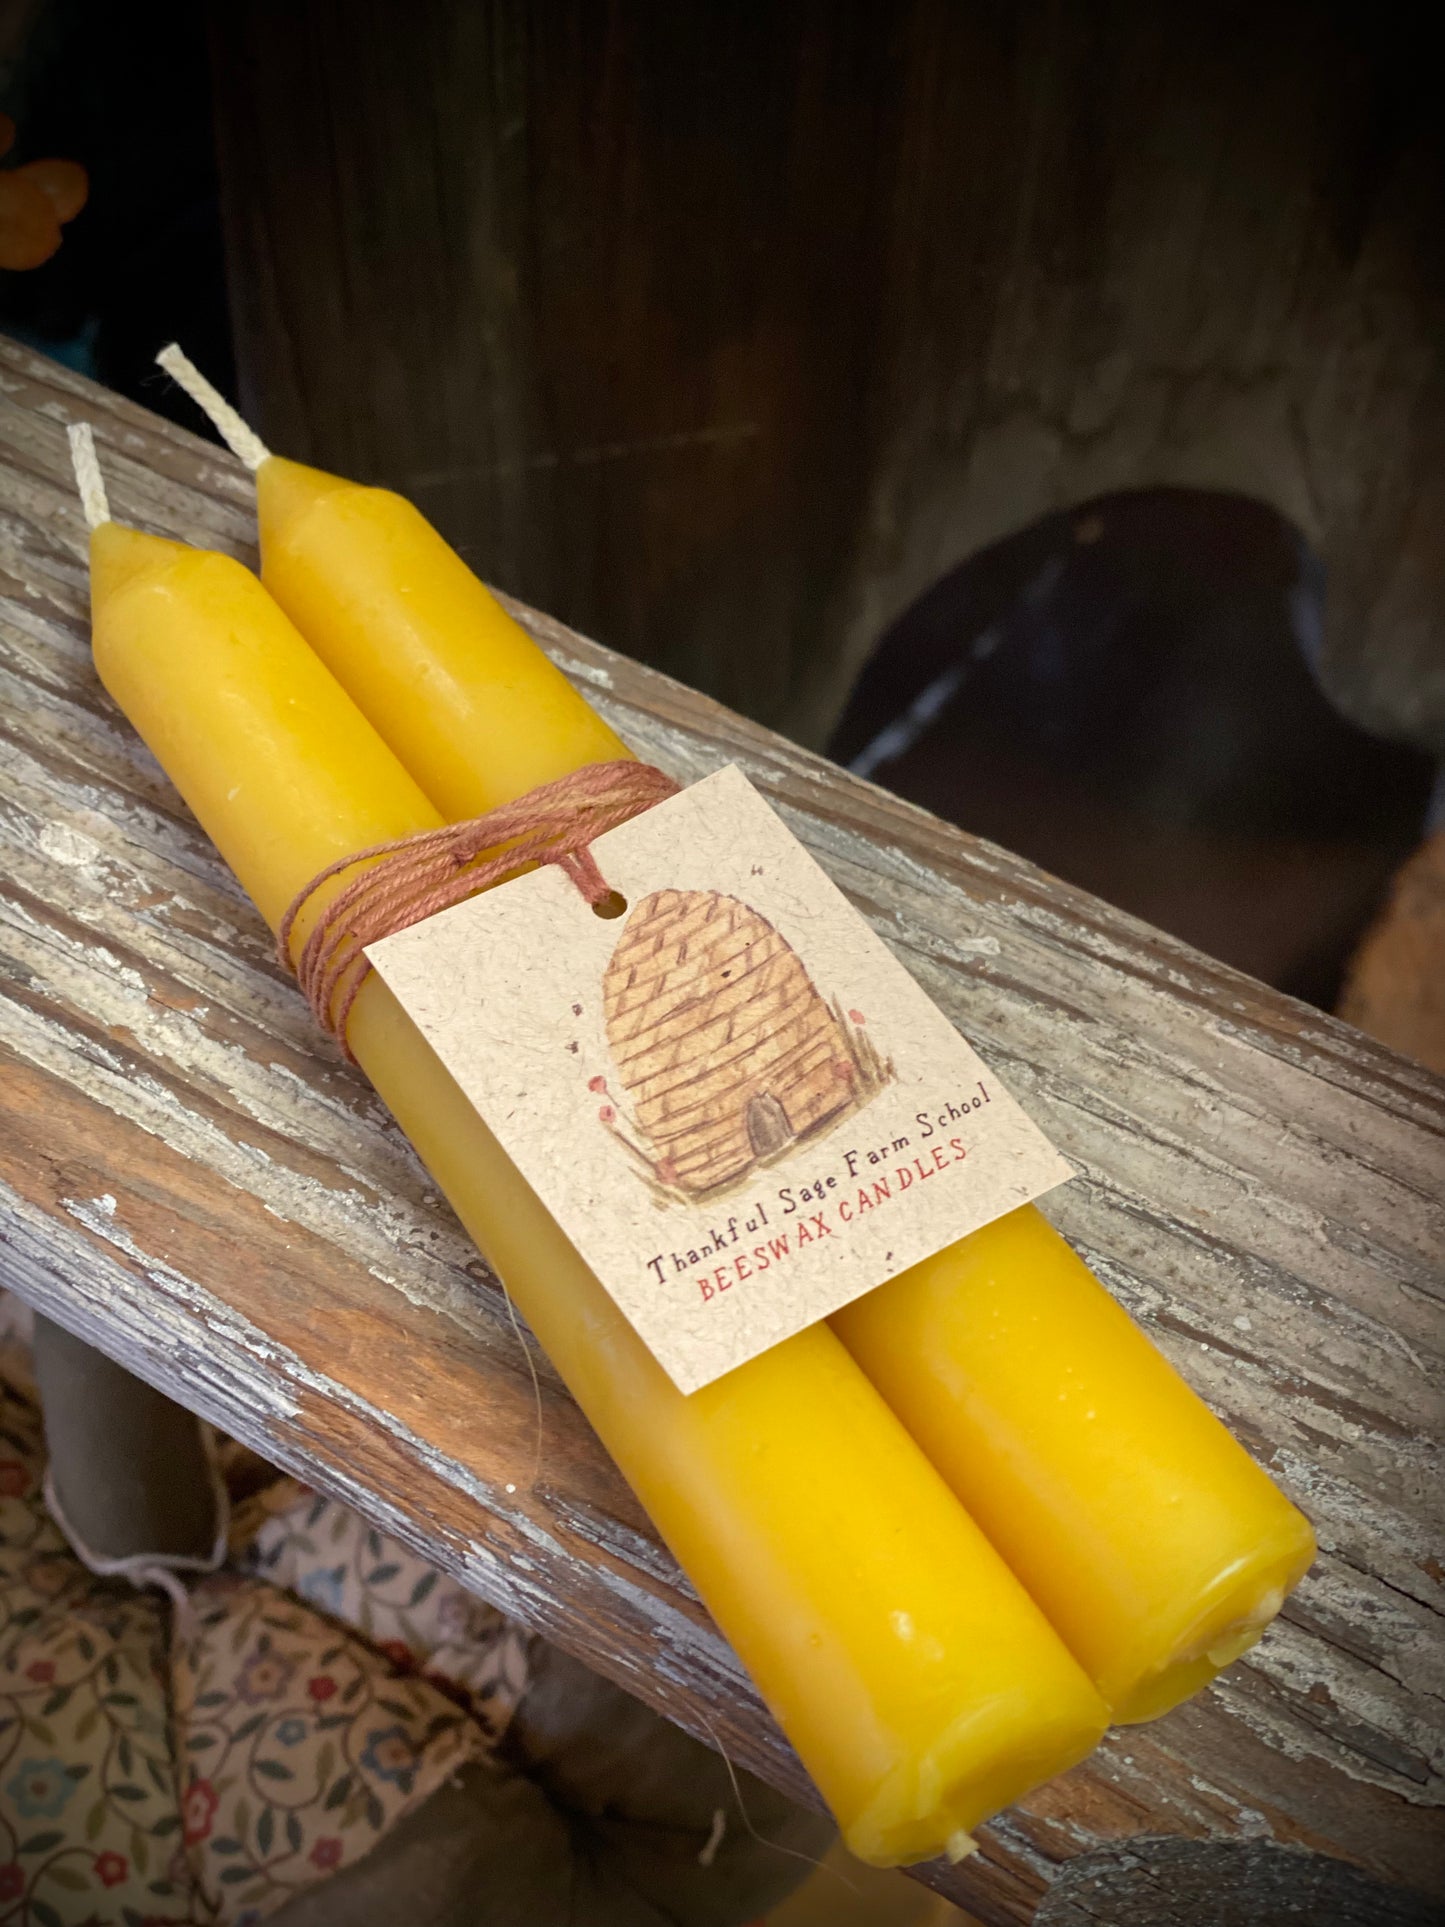 Homestead Beeswax Candles